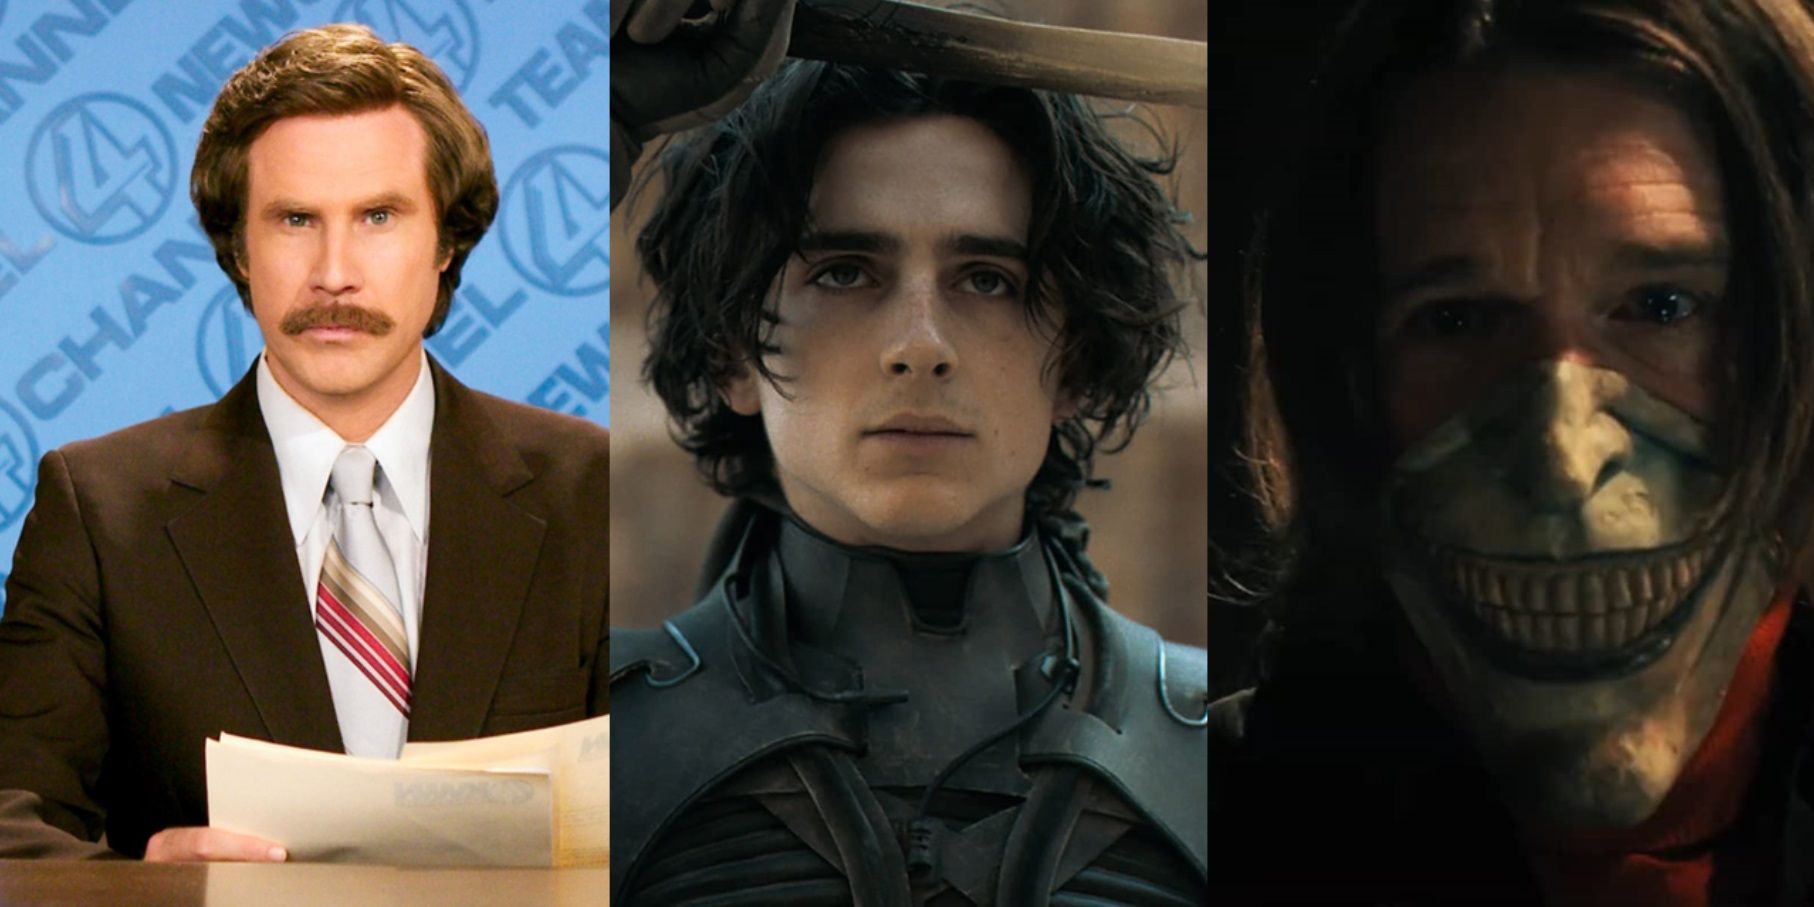 Split image of Will Ferrell in Anchorman, Timothee Chalamet in Dune, and Ethan Hawke in The Black Phone